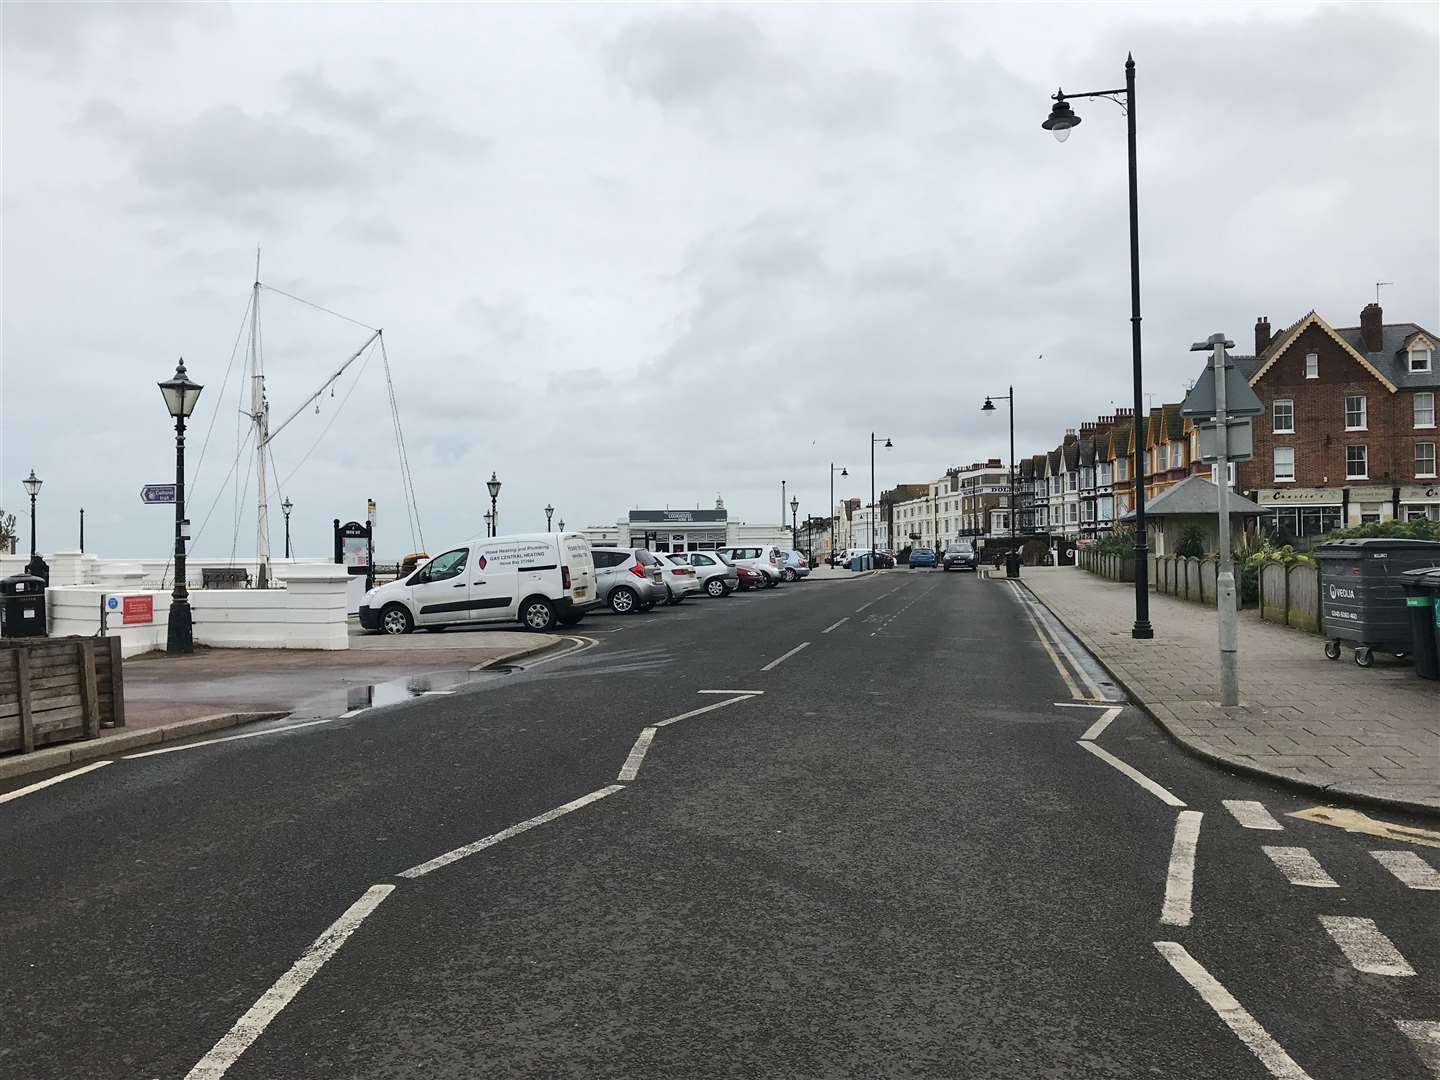 The seafront stretch between Station Road and Pier Avenue could be pedestrianised